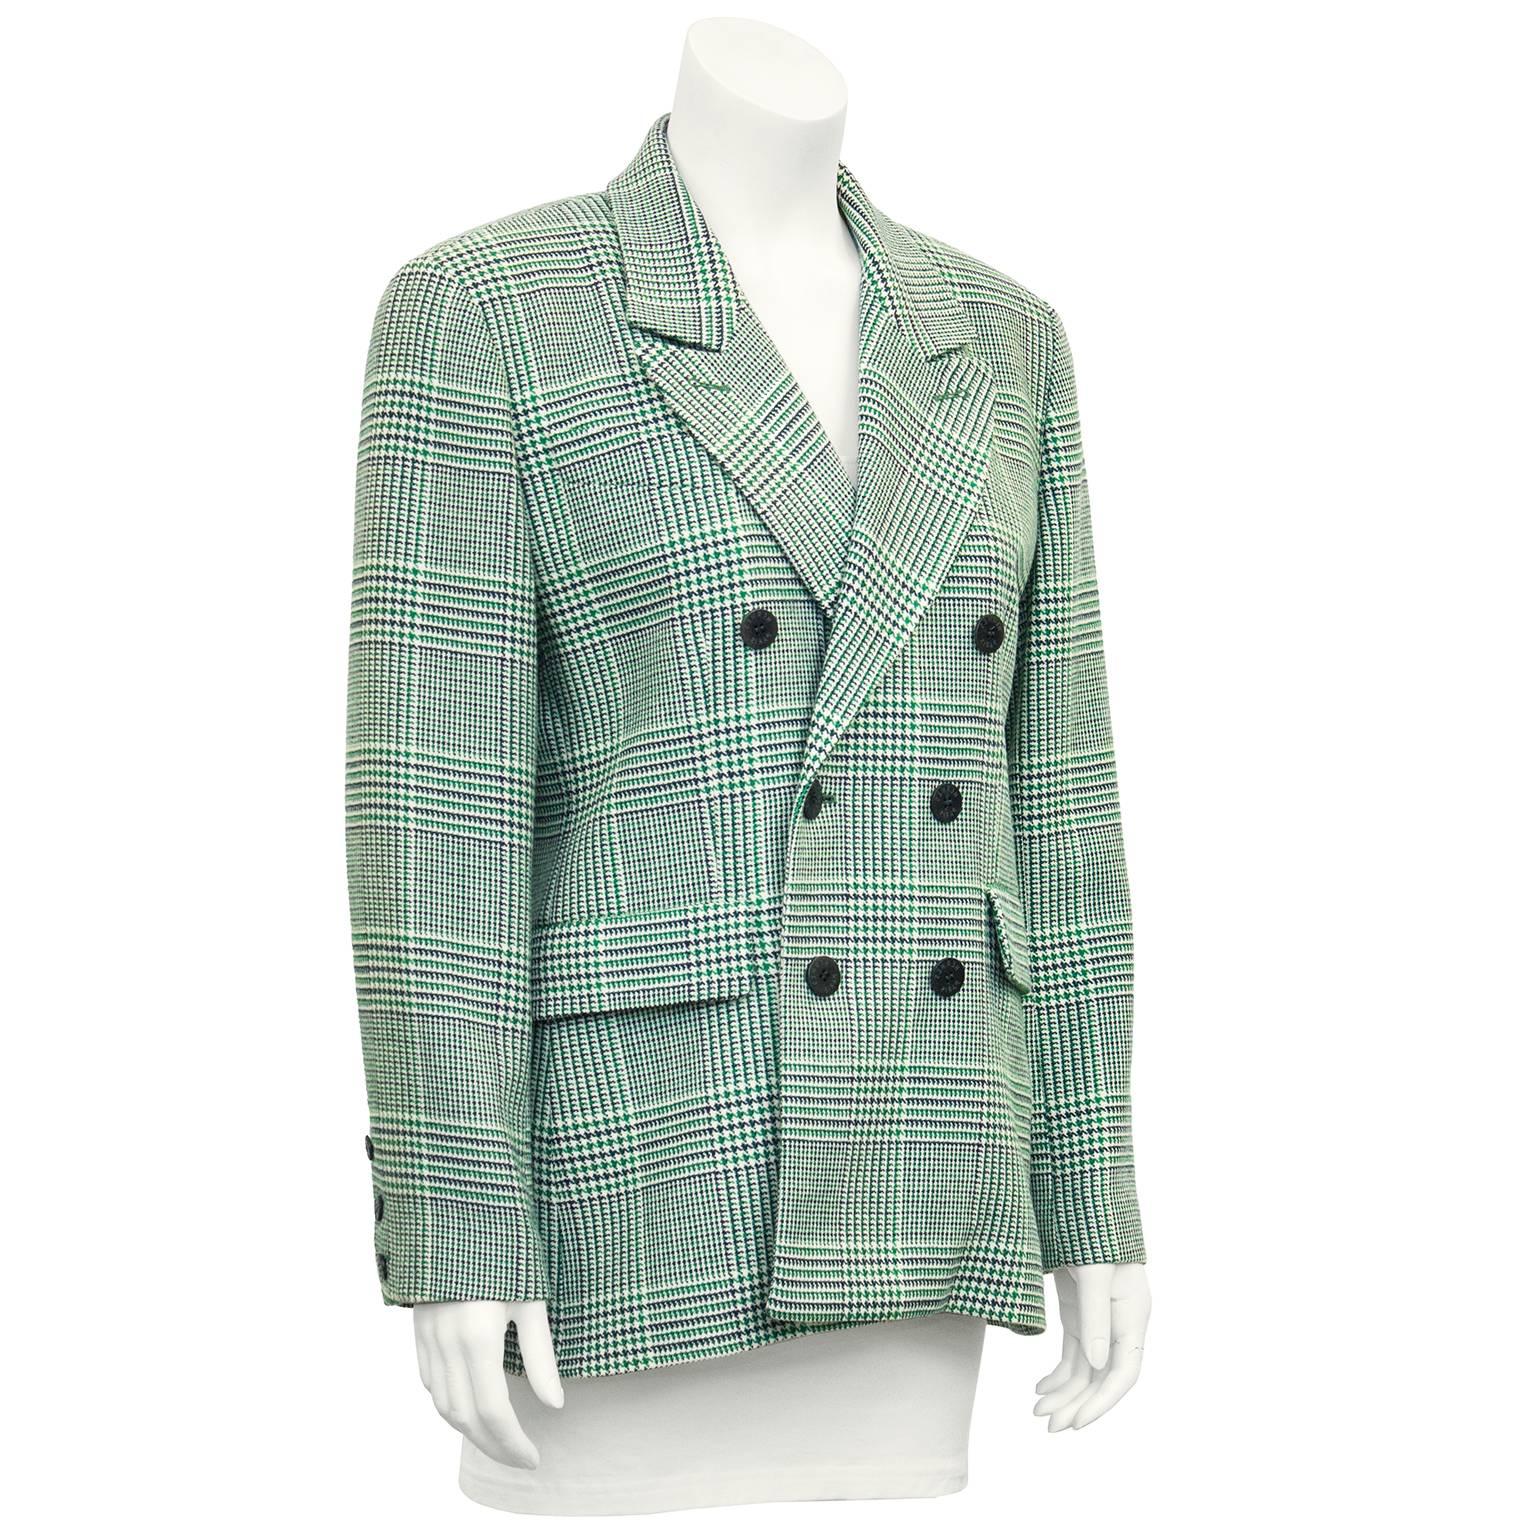 1990's Hermes wool and cashmere blend double breasted blazer. Green, black and white glen check, dark green silk lining. Great over jeans. Excellent vintage condition. FR 42, fits like US 8. The slightly oversized shoulder is very on trend for pre